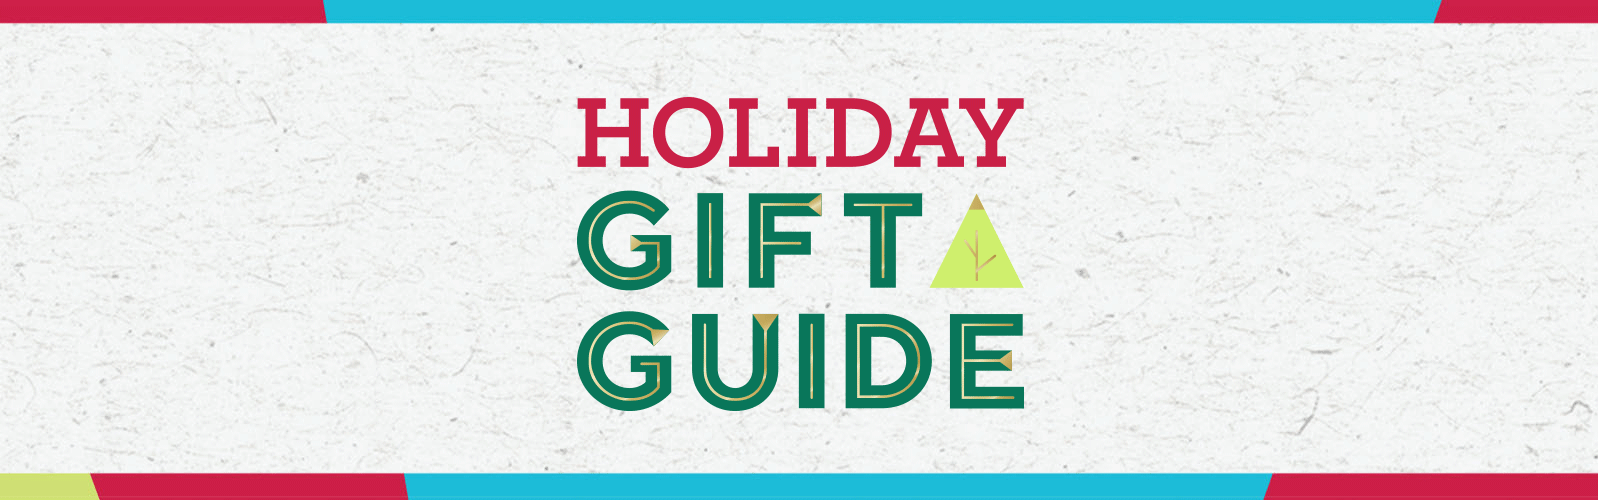 Gift Guide Gifts For All Qvccom